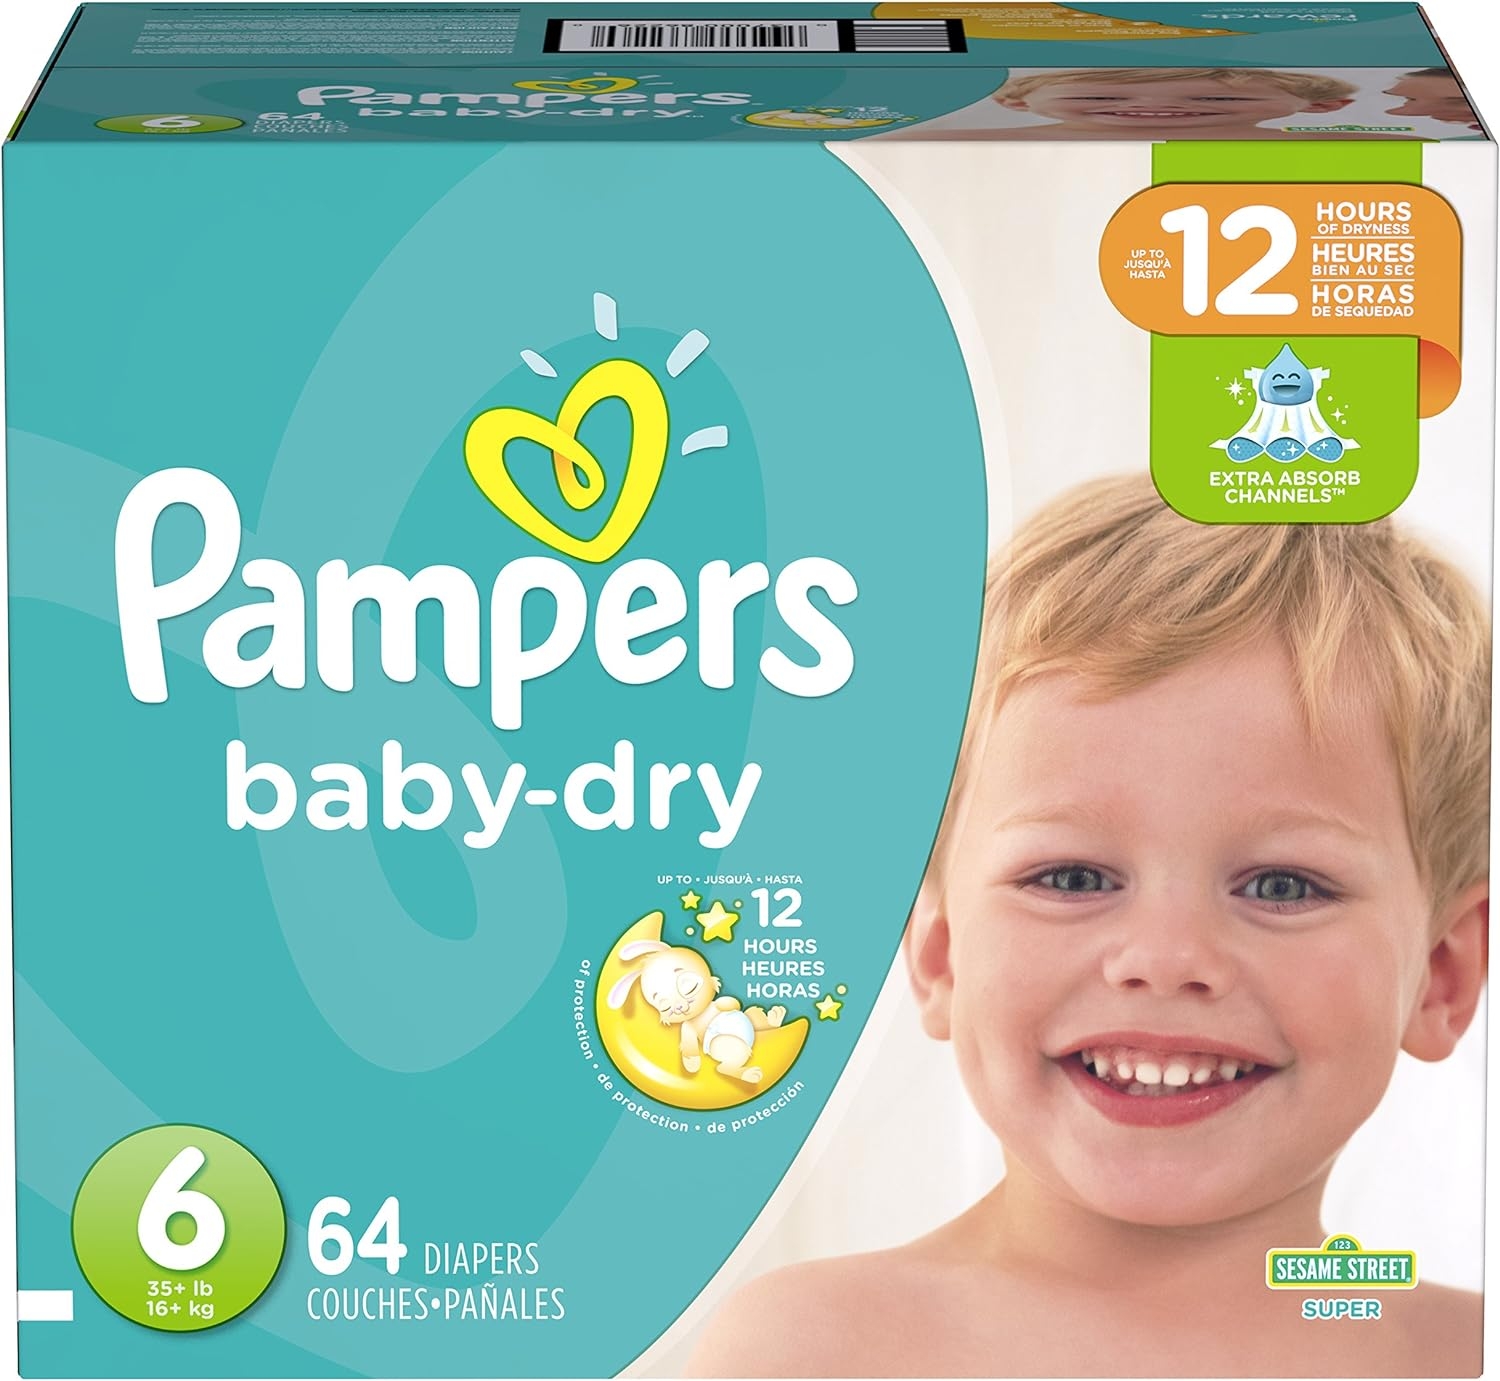 Diapers Size 6, 64 Count - Pampers Baby Dry Disposable Baby Diapers, Super Pack, Packaging & Prints May Vary